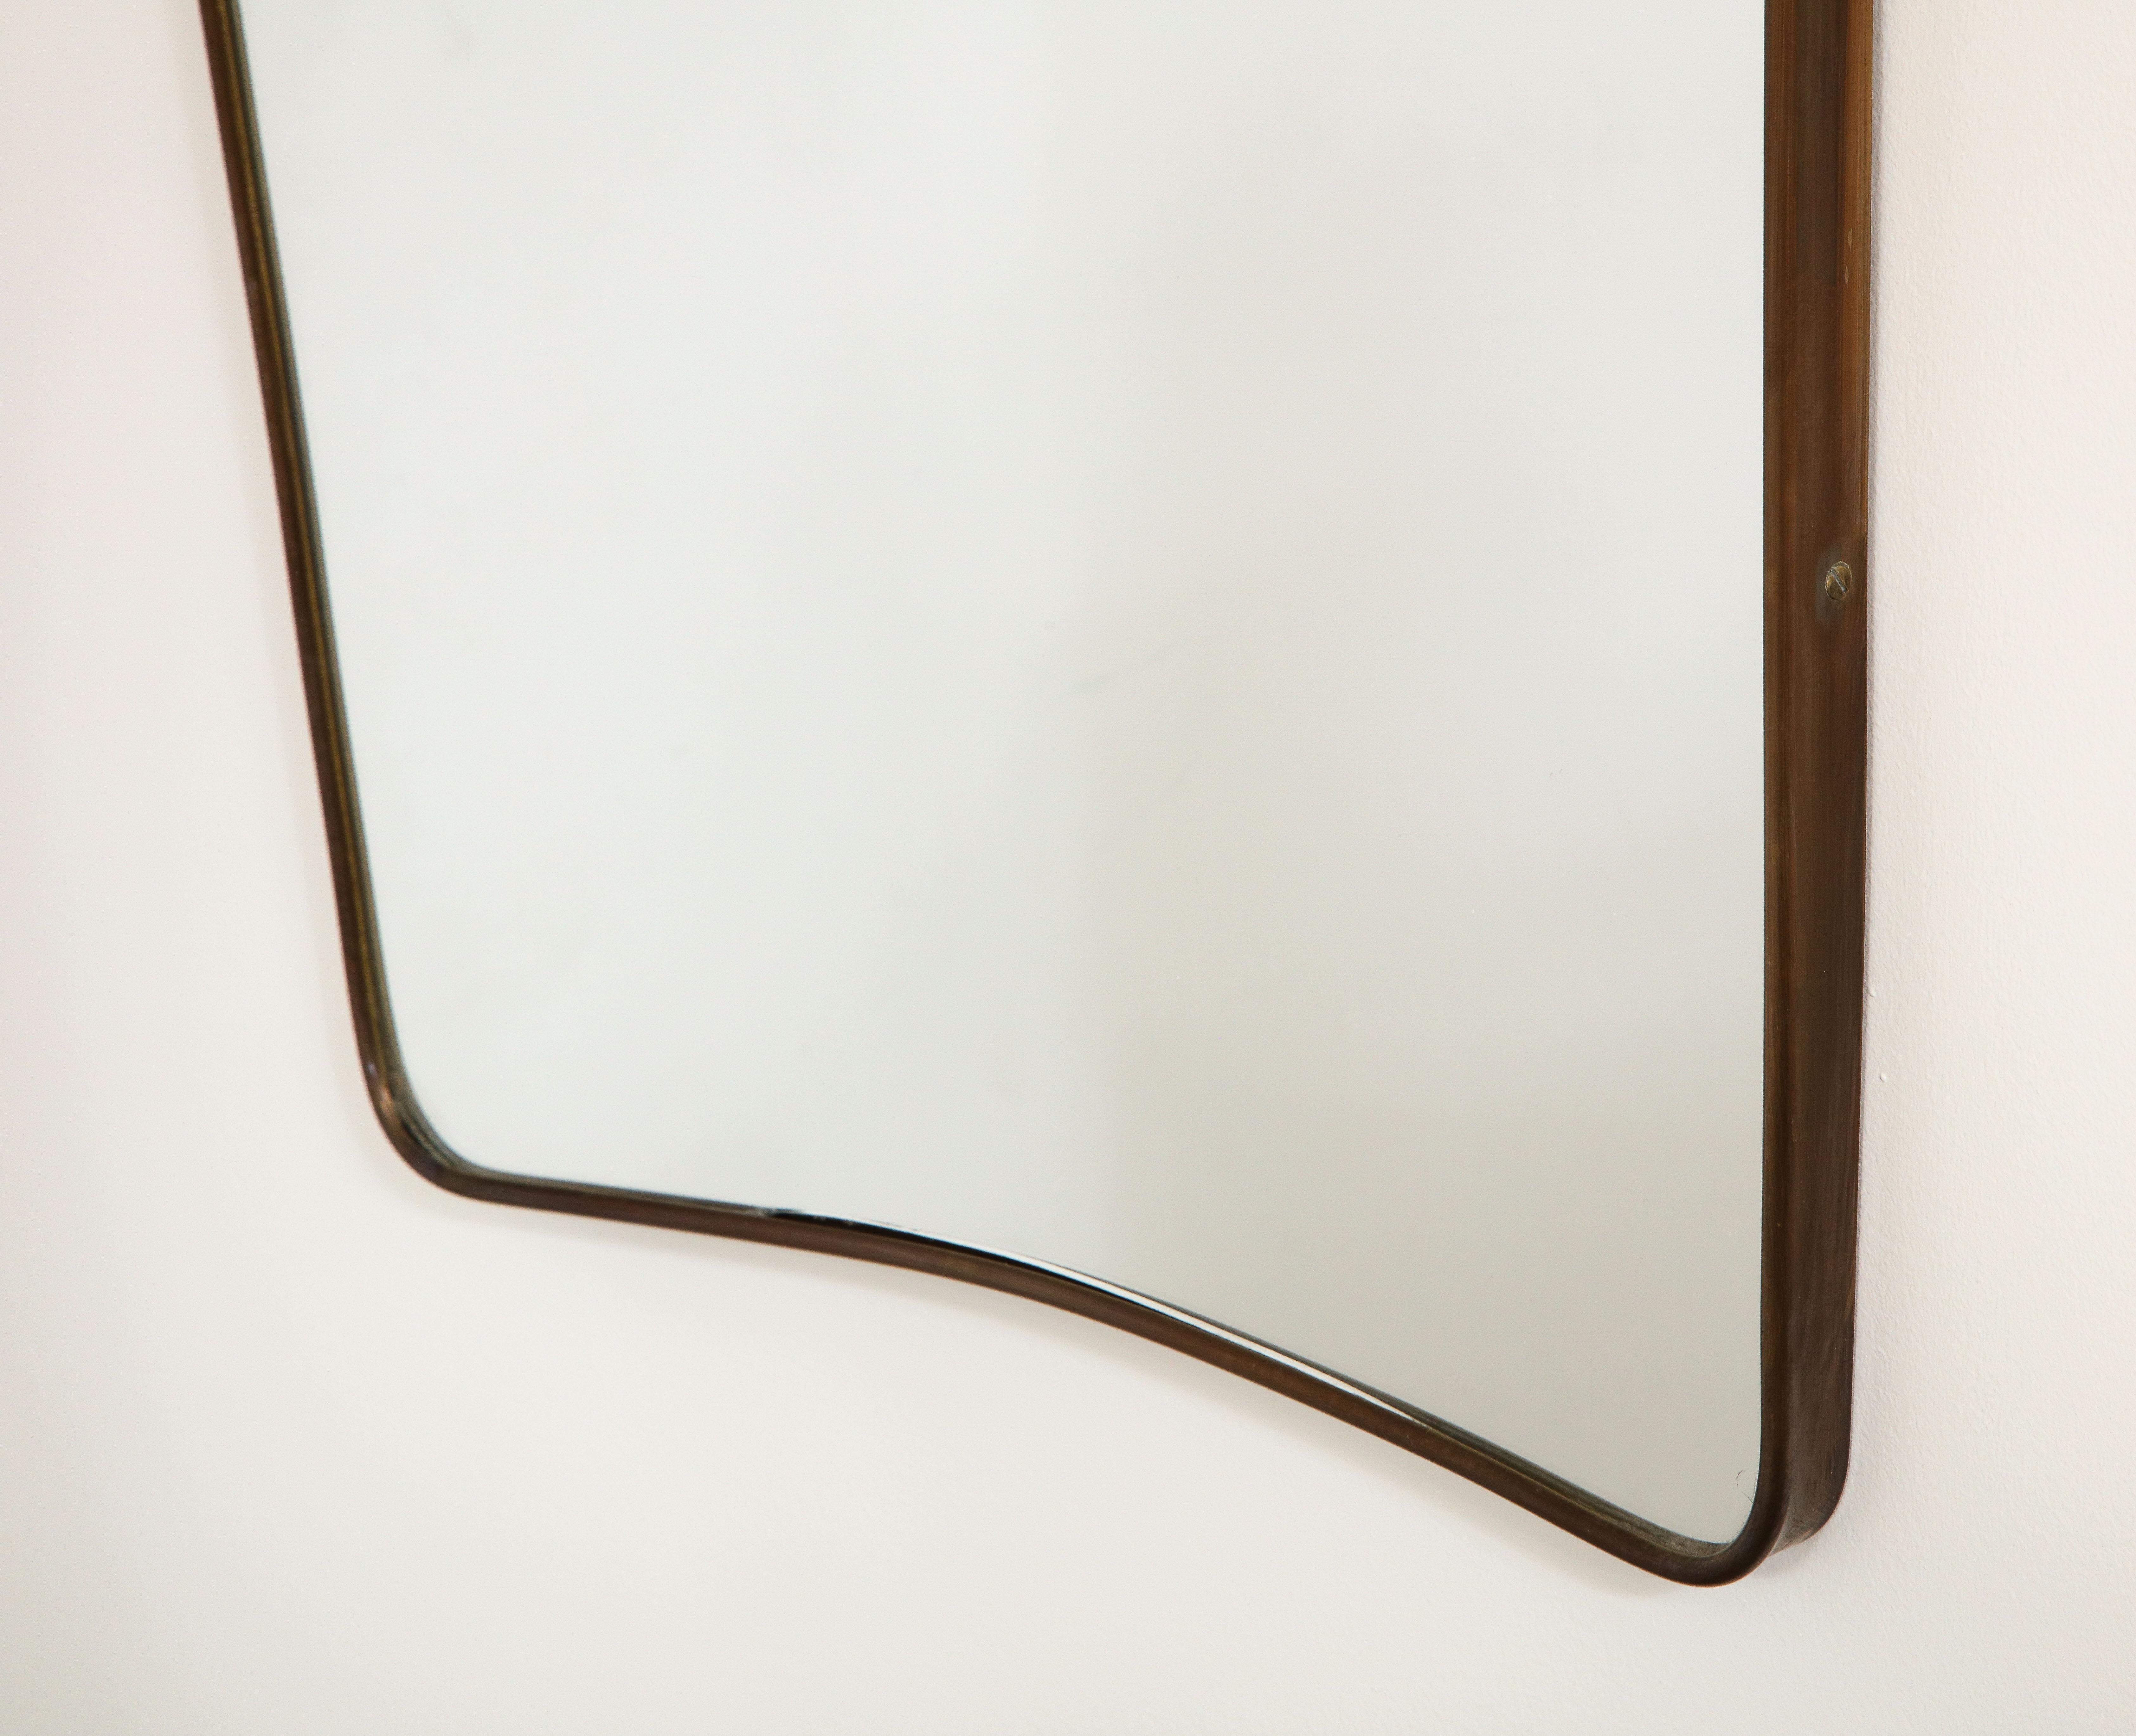 Modernist Italian 1950's Shaped Brass Mirror In Good Condition For Sale In New York, NY